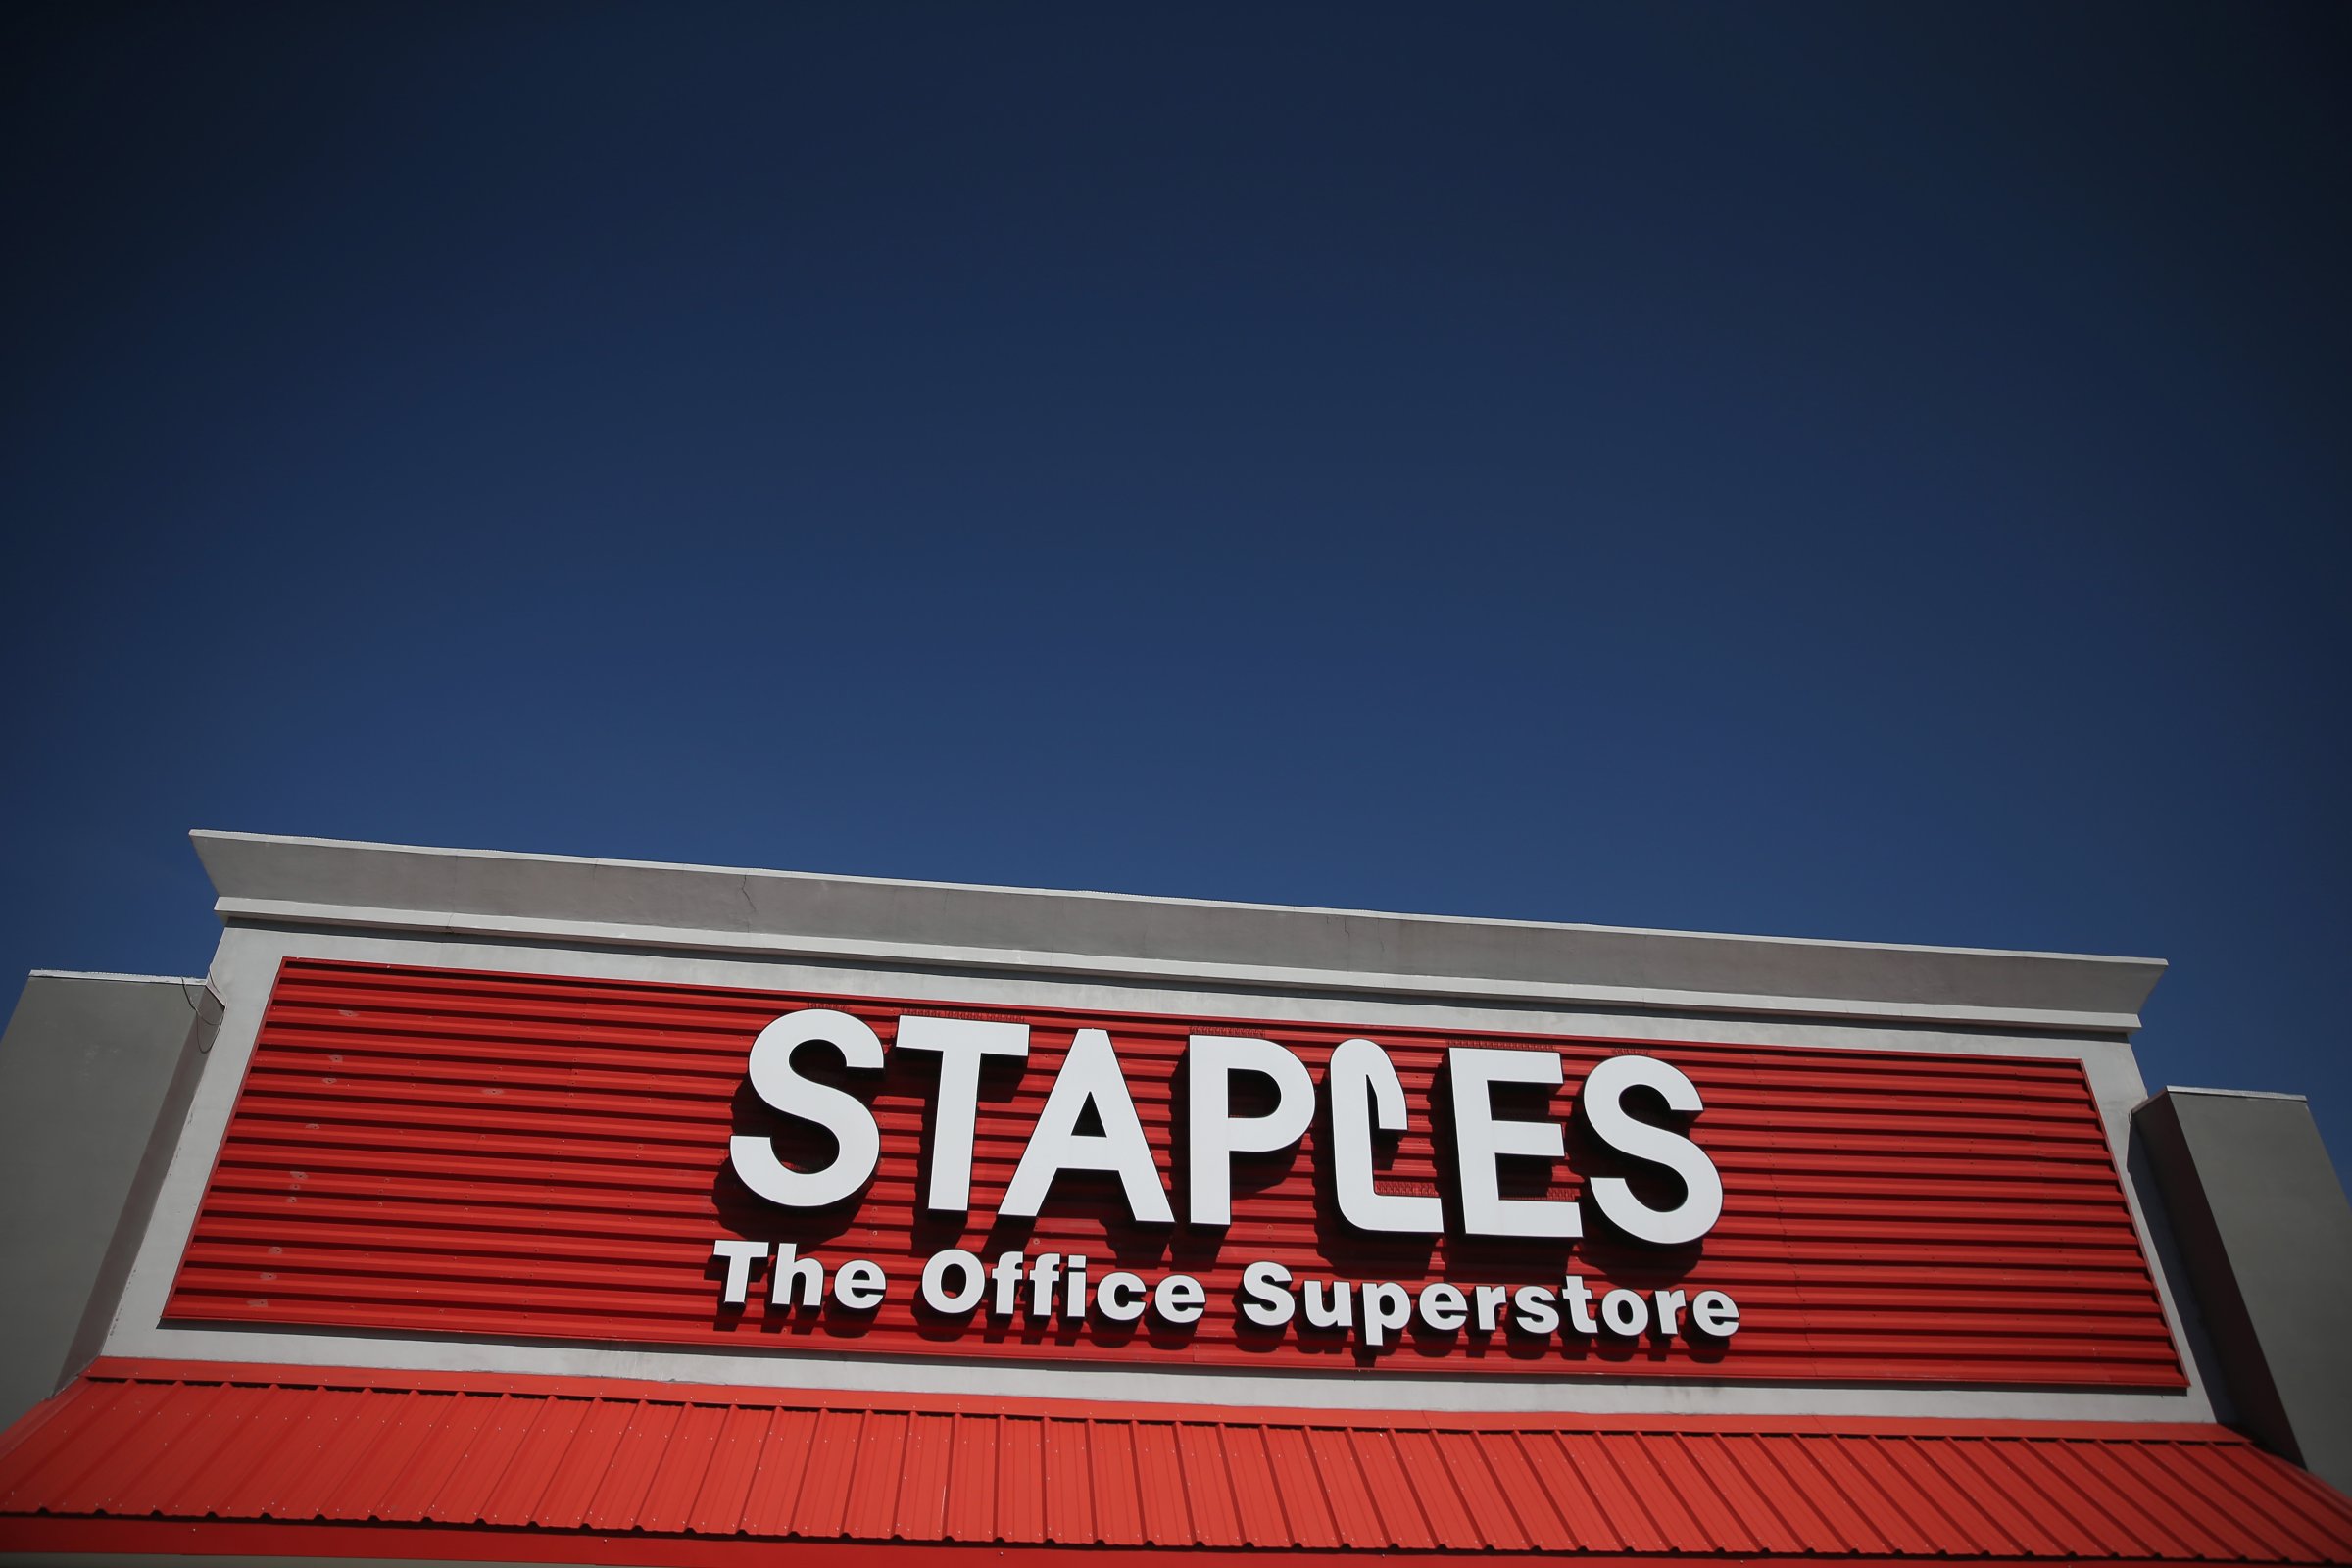 The sign logo for a Staples store is seen on February 3, 2015 in Miami, Florida.